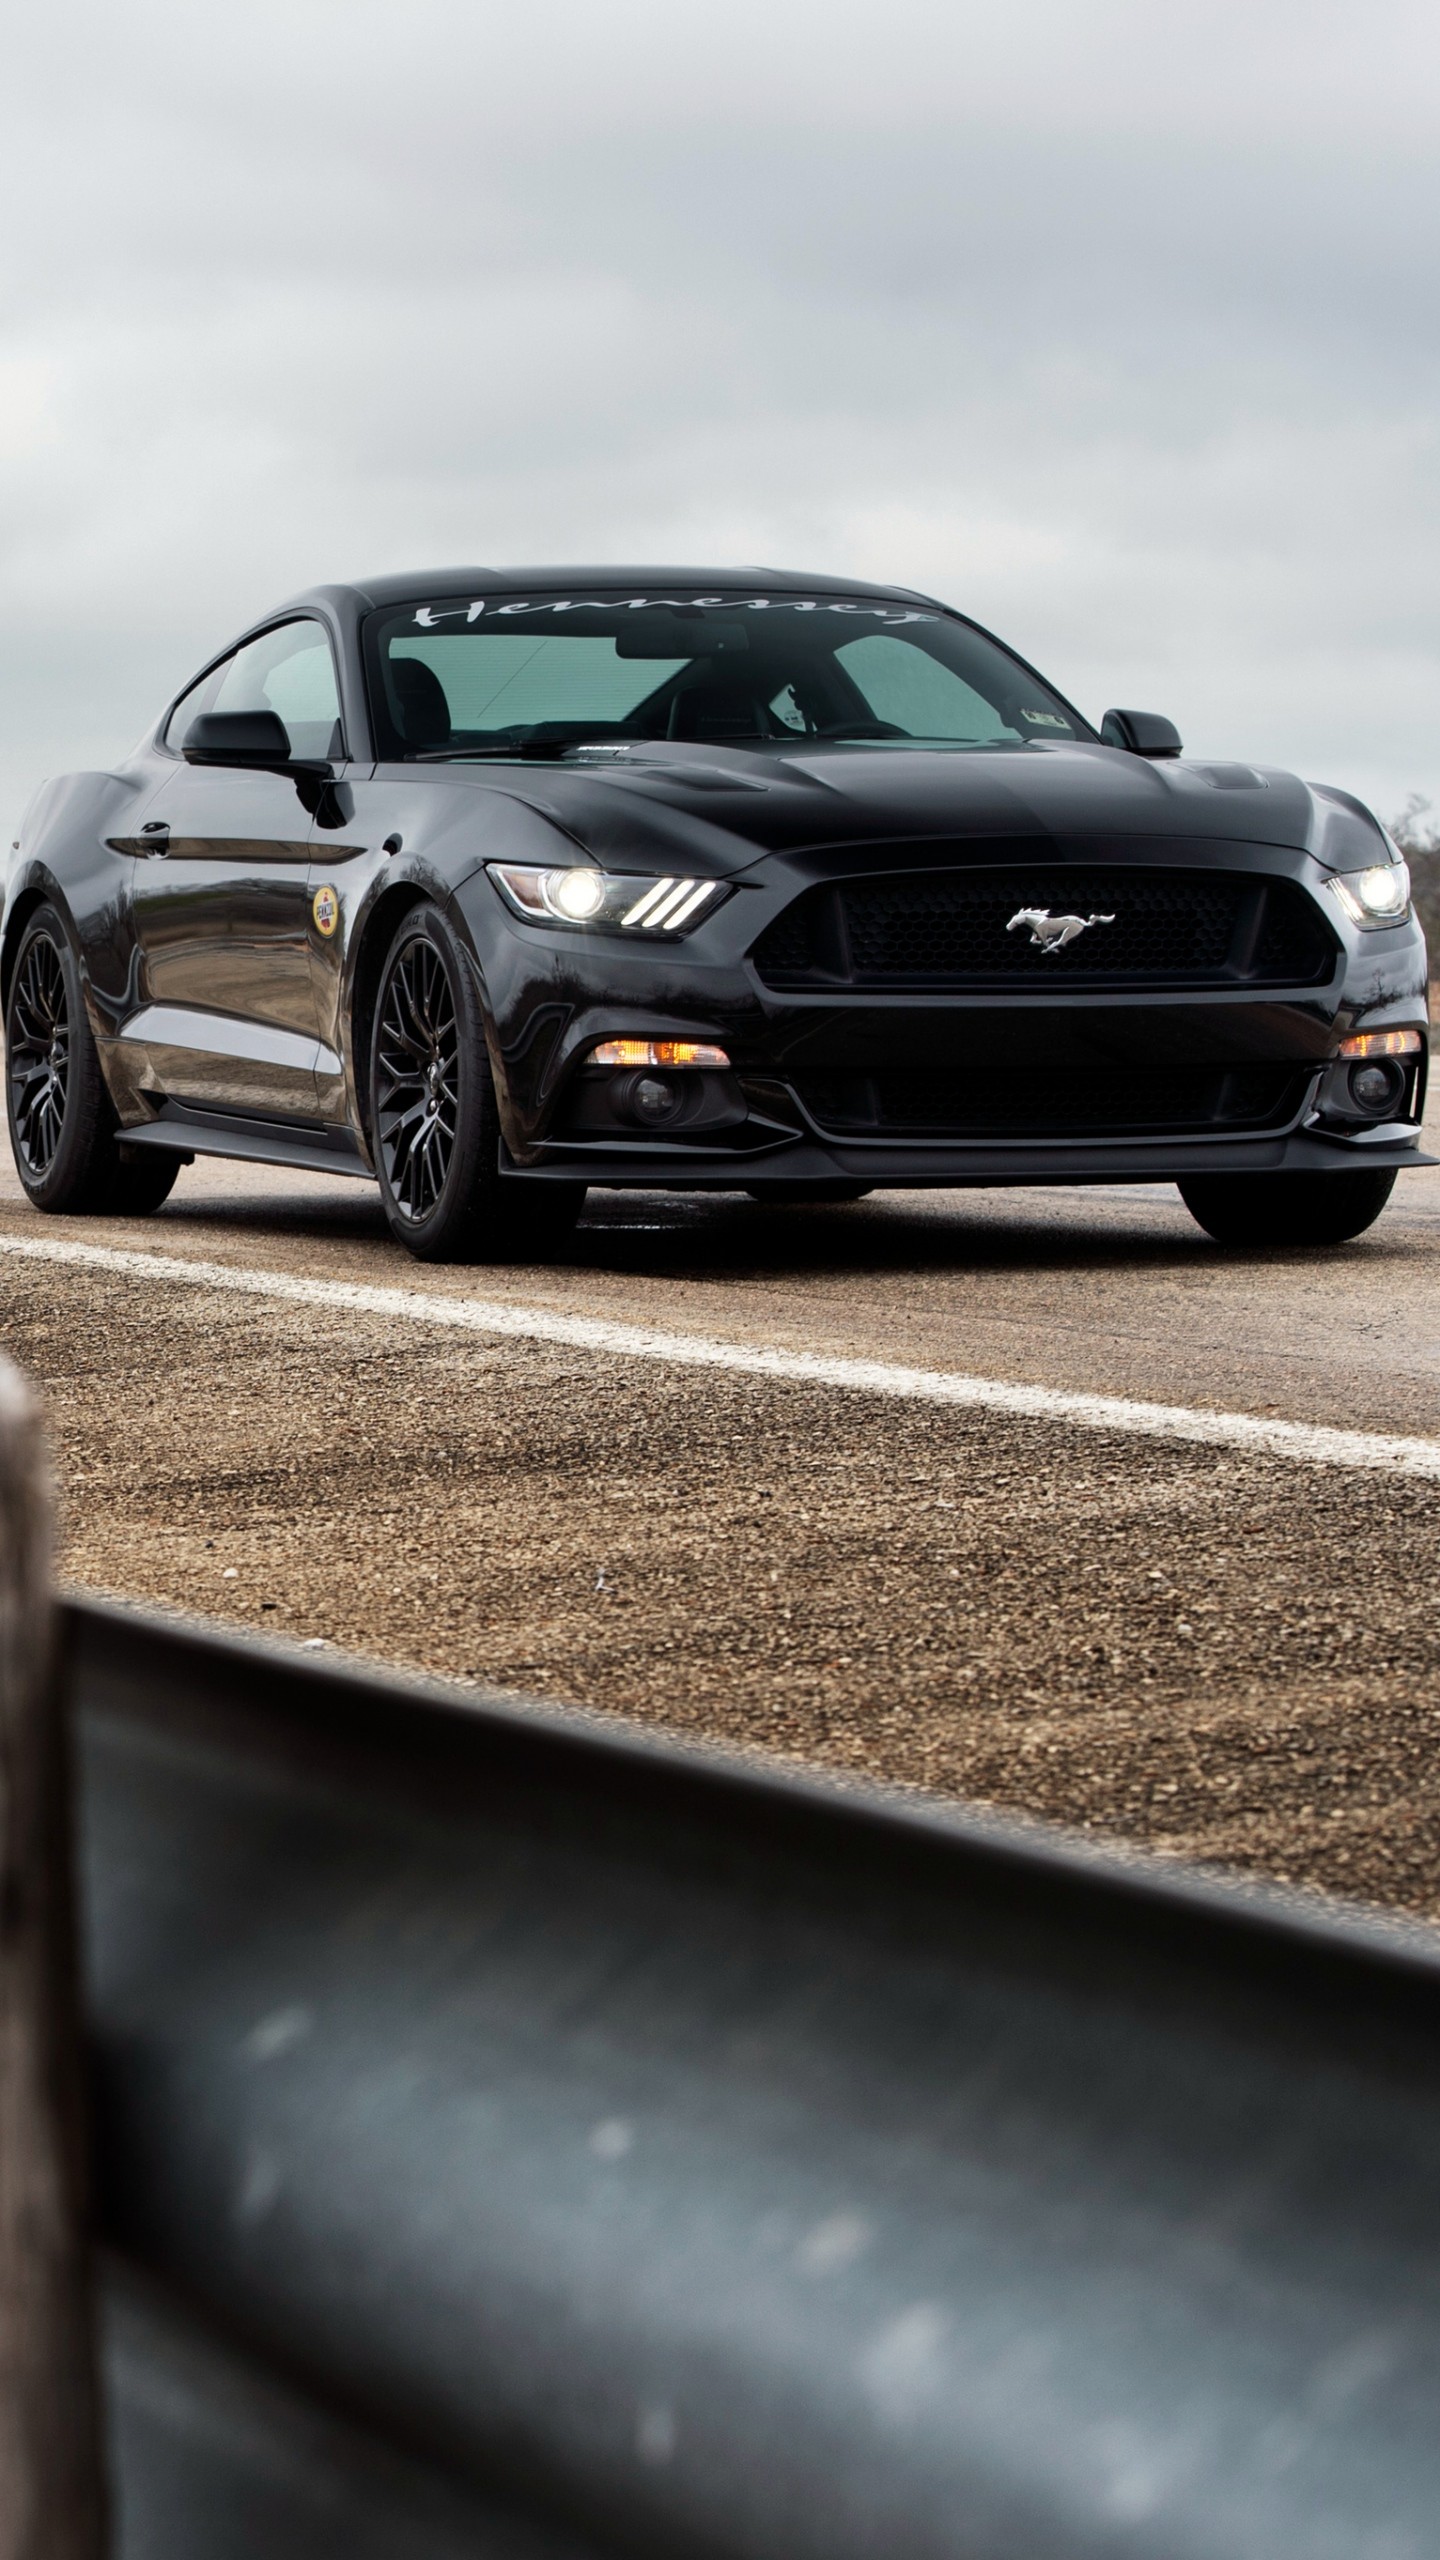 Preview Wallpaper Ford Mustang Gt Hpe700 Hennessey Mustang Wallpaper Iphone 6s 1440x2560 Wallpaper Teahub Io